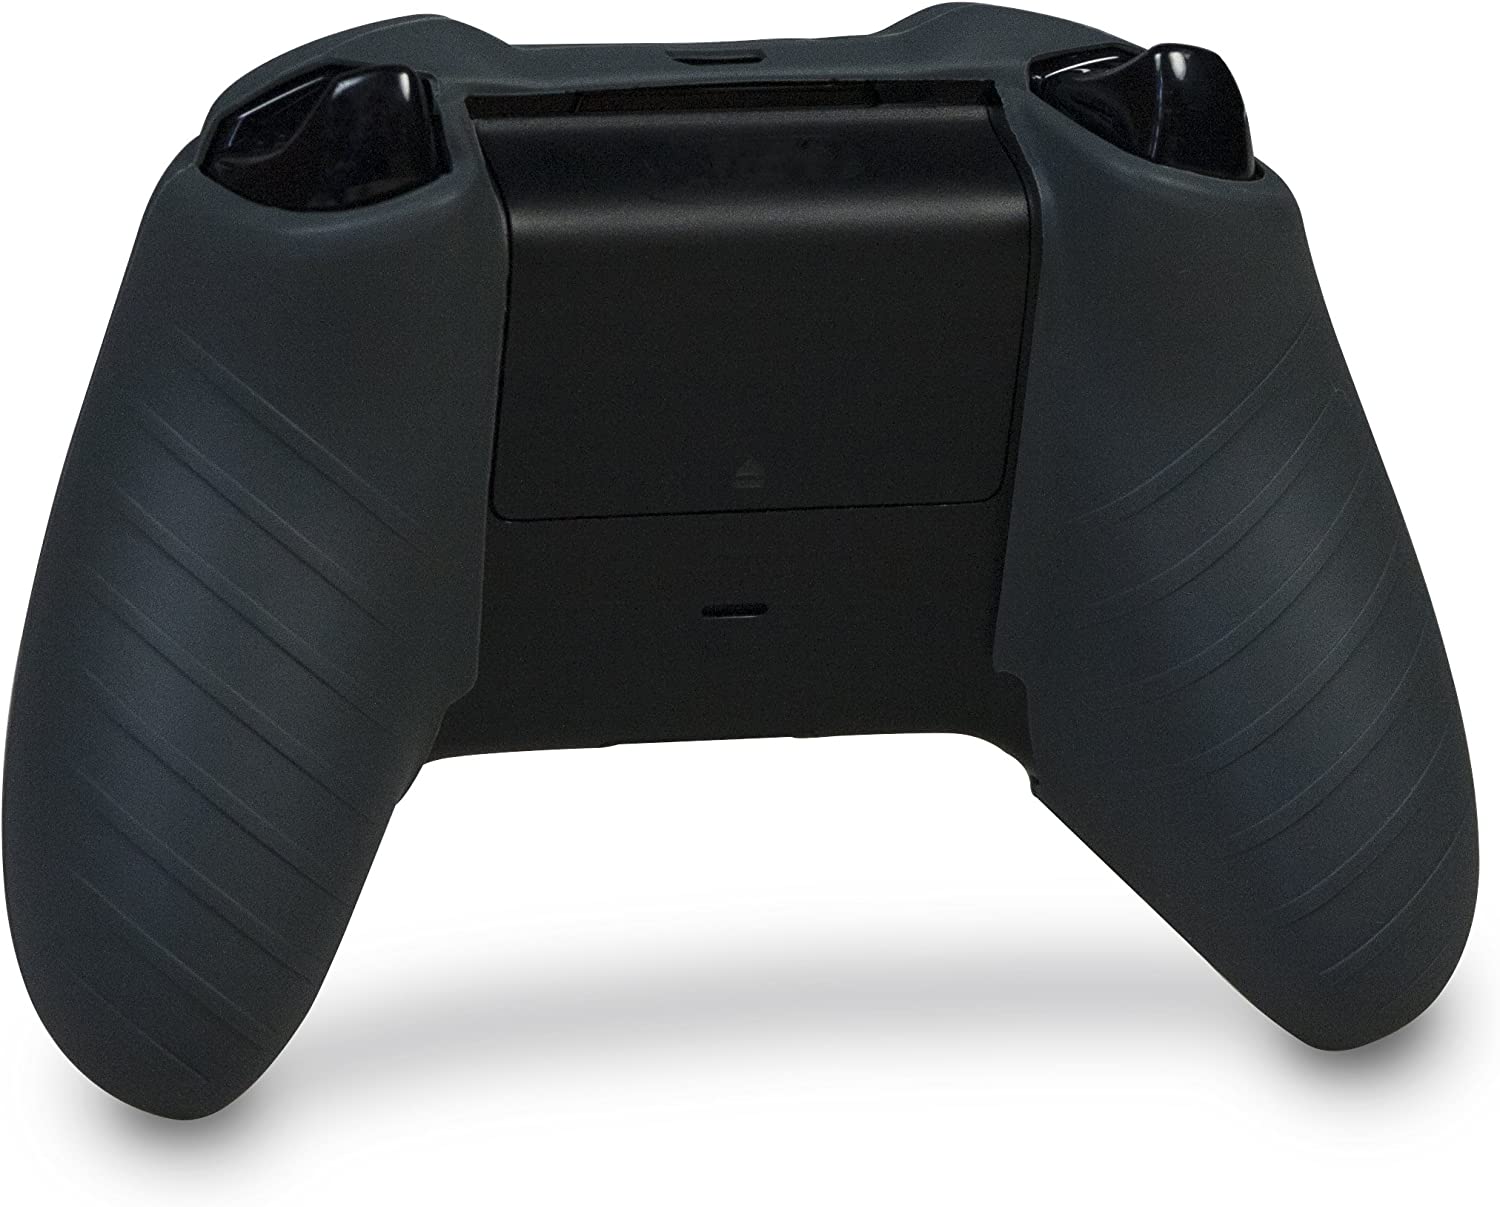 Stealth SX112 Game Grips (Xbox One)